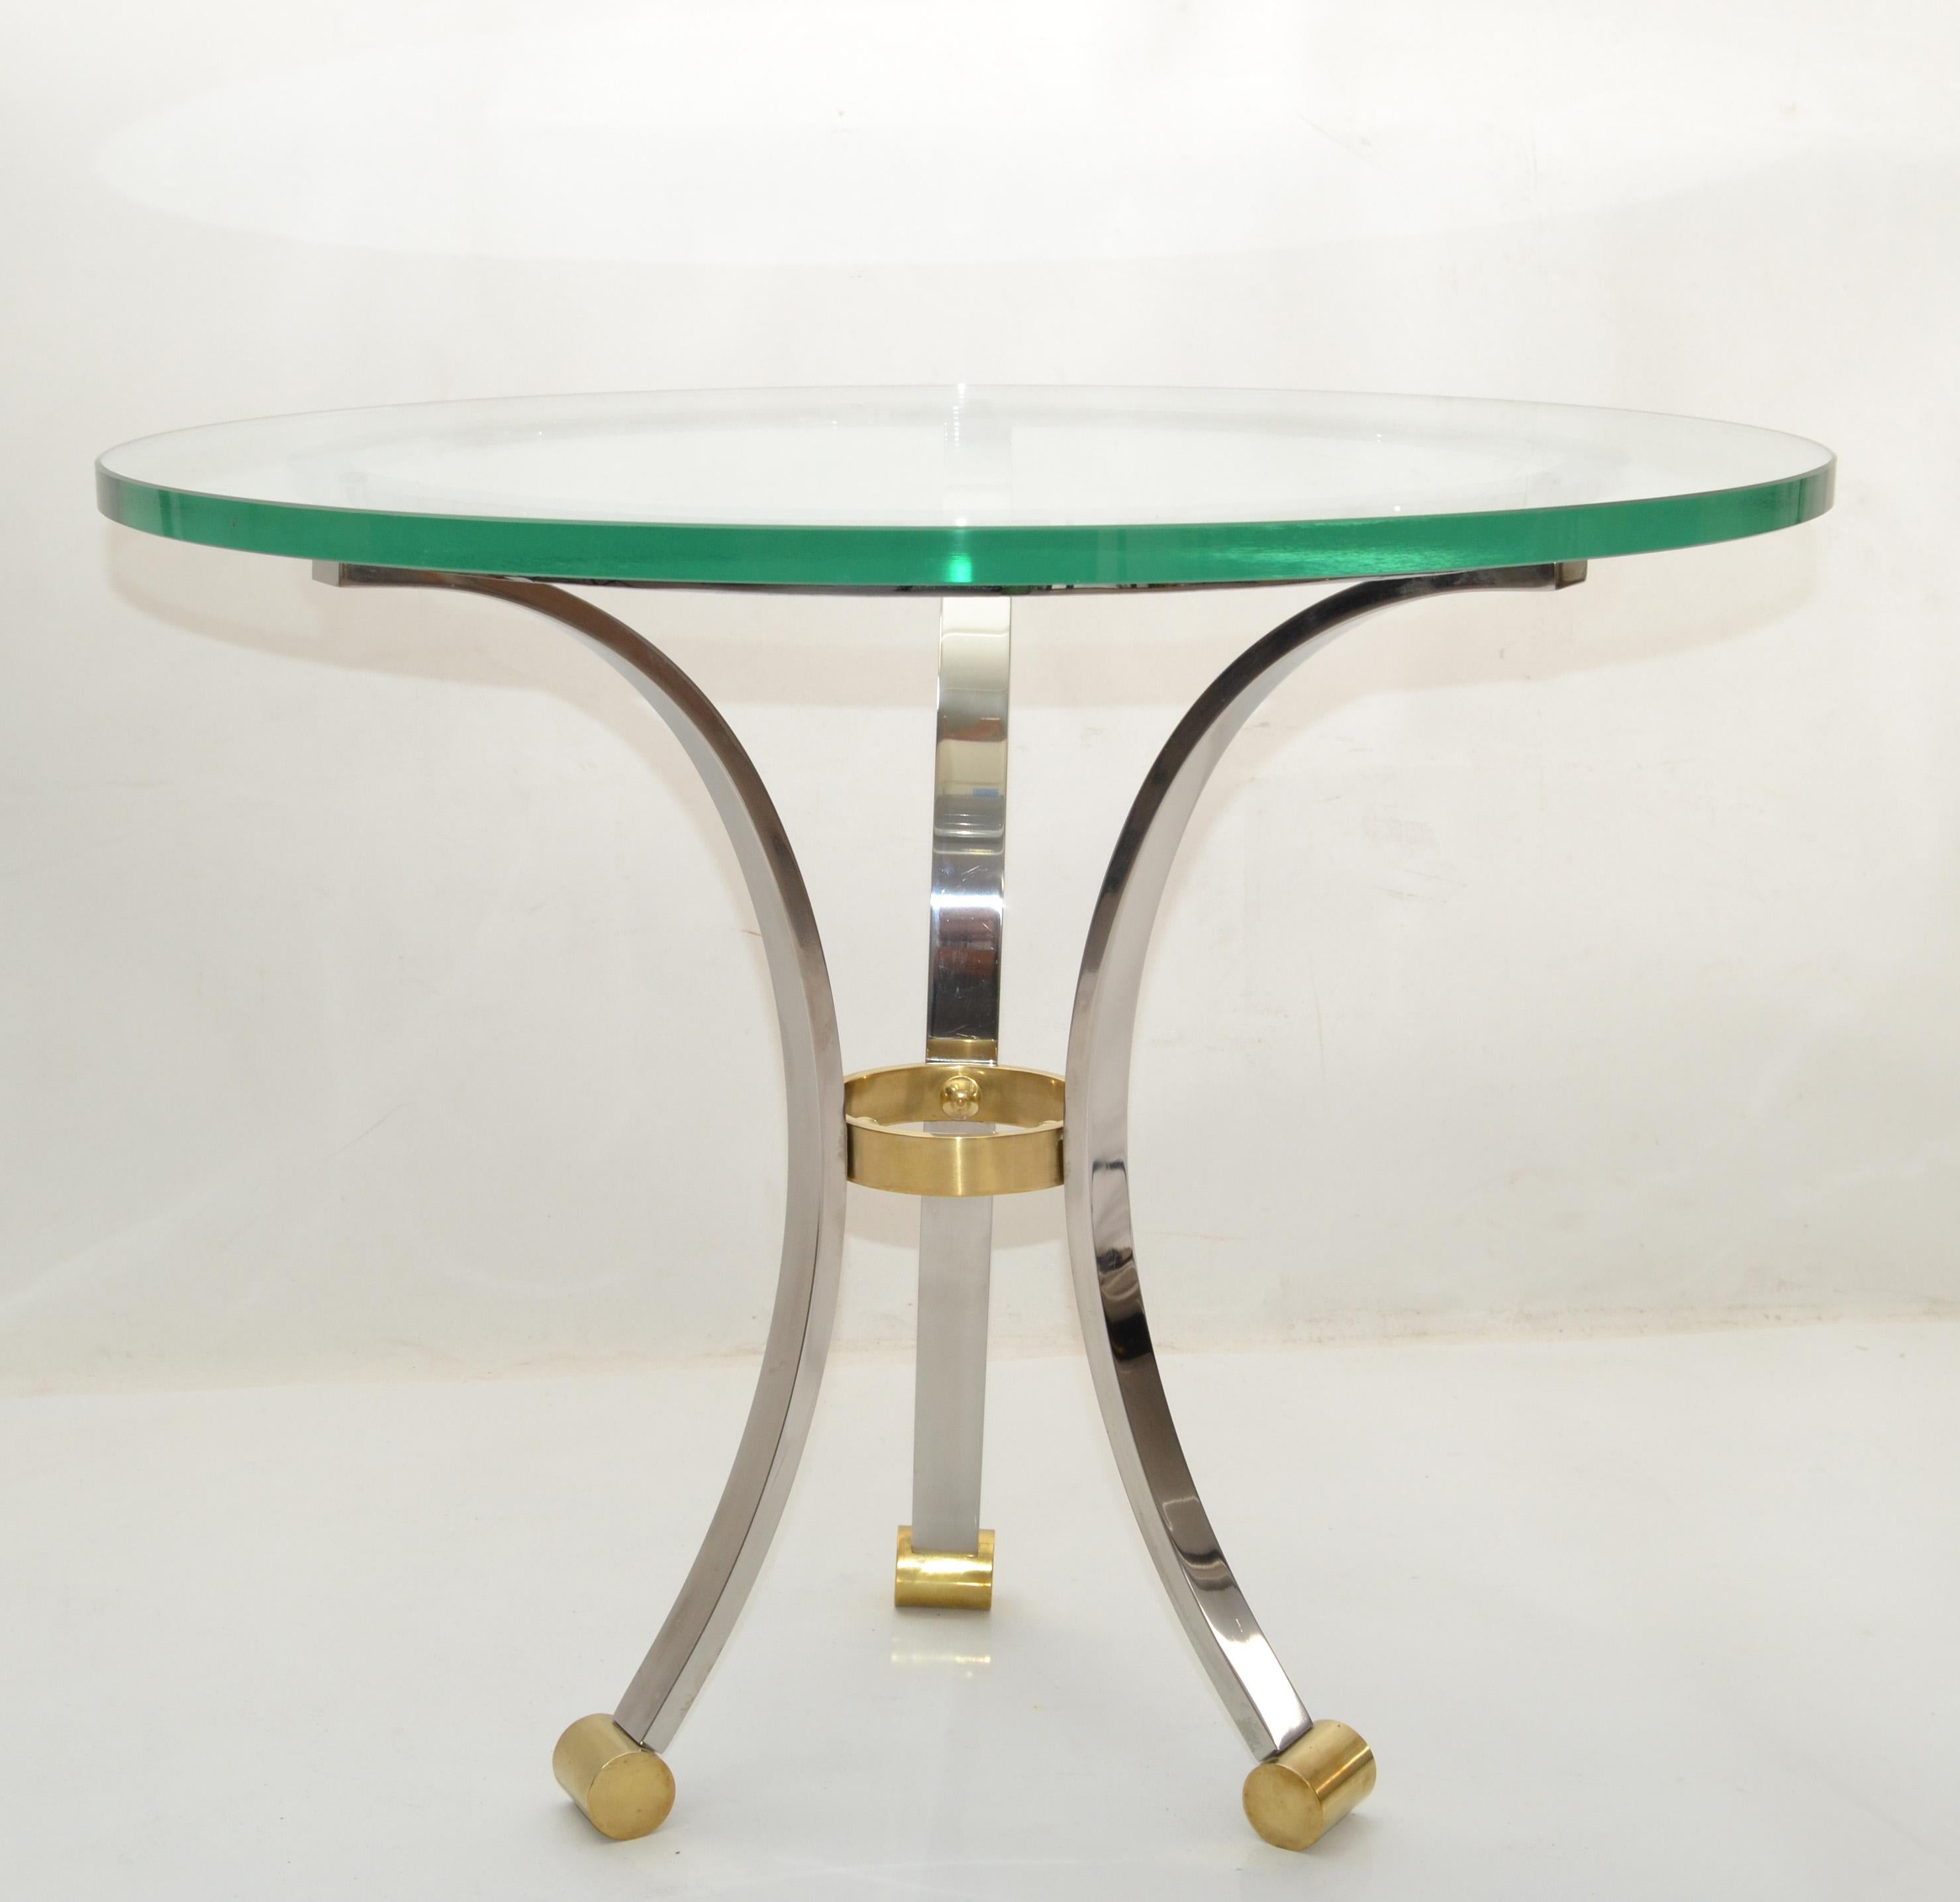 French neoclassical Maison Jansen coffee table in Steel with Brass Details and round thick beveled glass top.
The coffee table is in very good original condition.
Glass measures: 27 inches diameter, 0.75 inches thick.
Base measures: Diameter 21